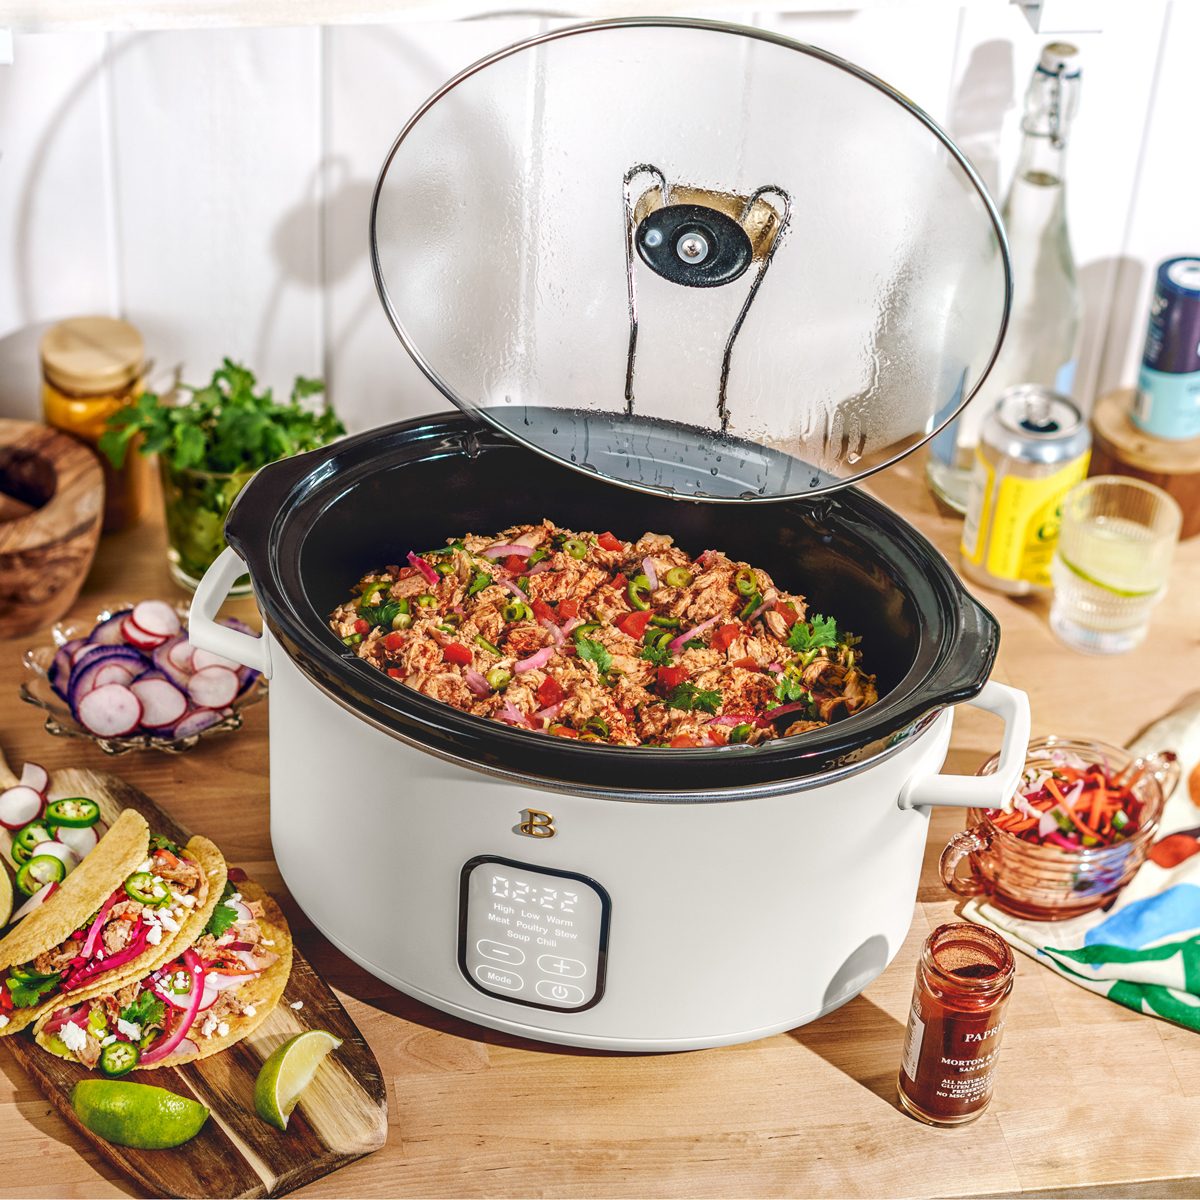 https://www.tasteofhome.com/wp-content/uploads/2023/11/Slow-Cooker-Via-Merchant-DH-TOH-Drew-Barrymore-Home-Products.jpg?fit=700%2C700